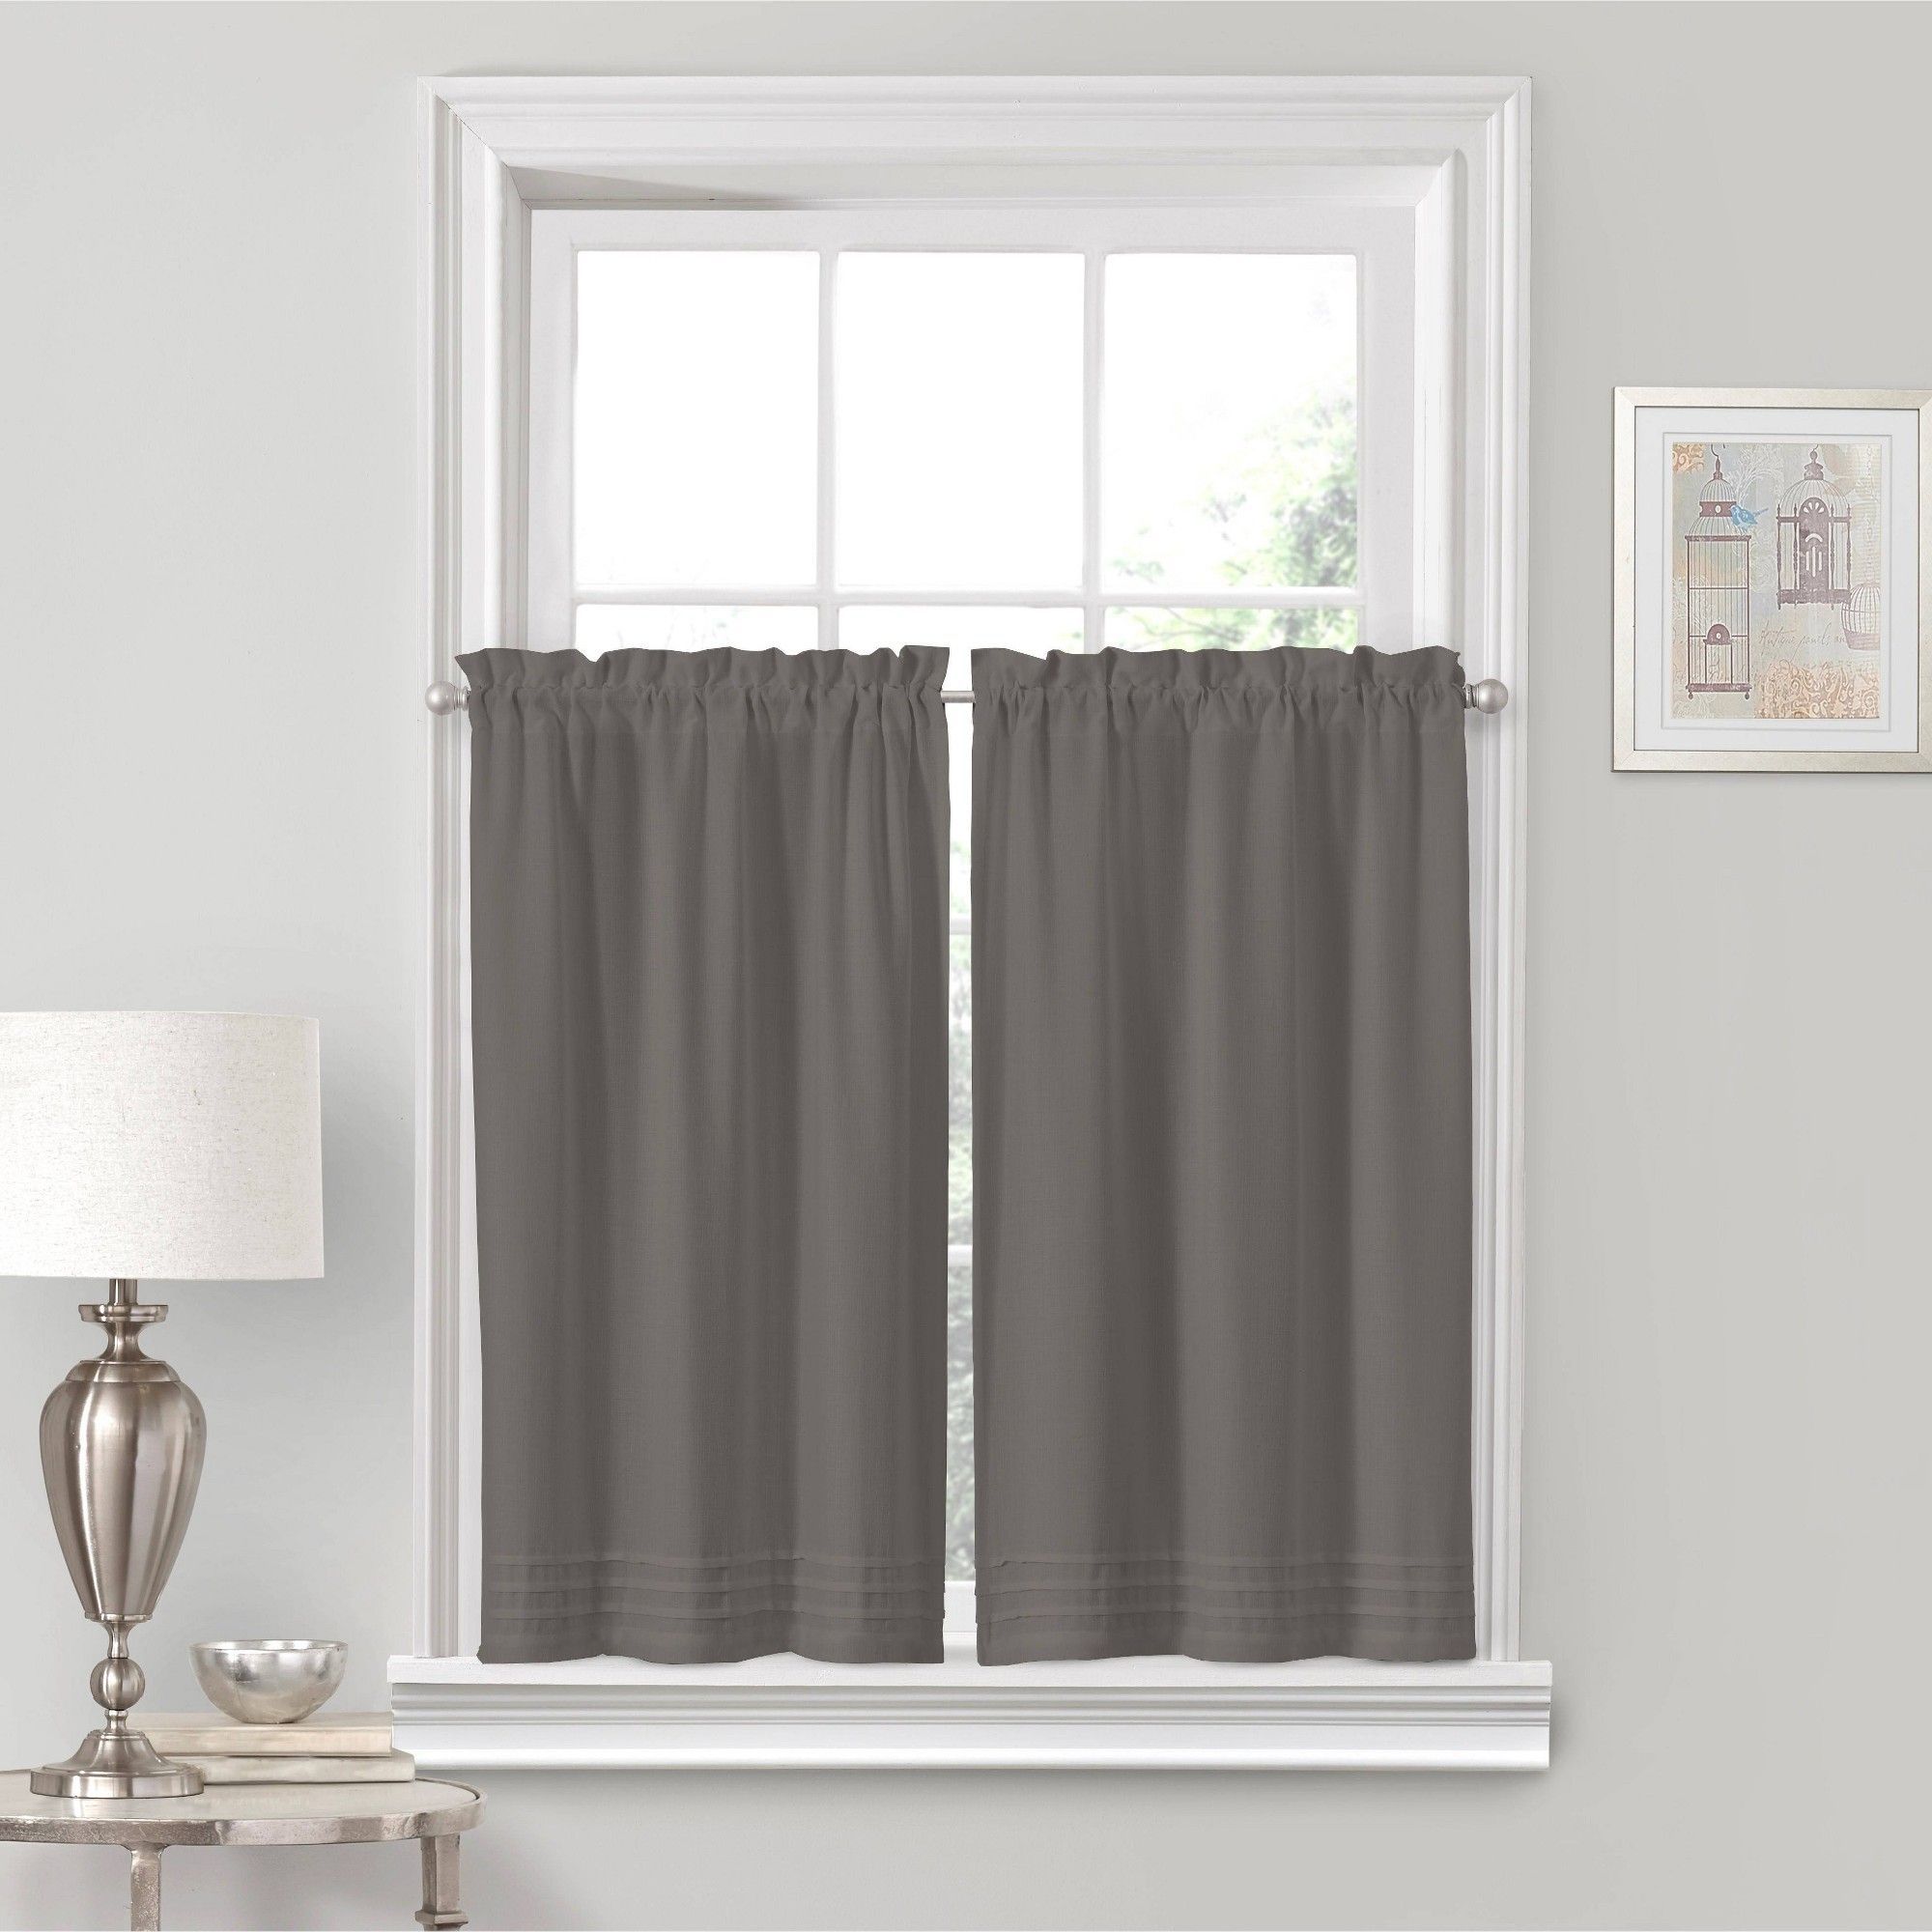 45"x52" Kingsbury Rod Pocket Curtain Tier Set Gray – Eclipse Intended For Dove Gray Curtain Tier Pairs (View 12 of 20)